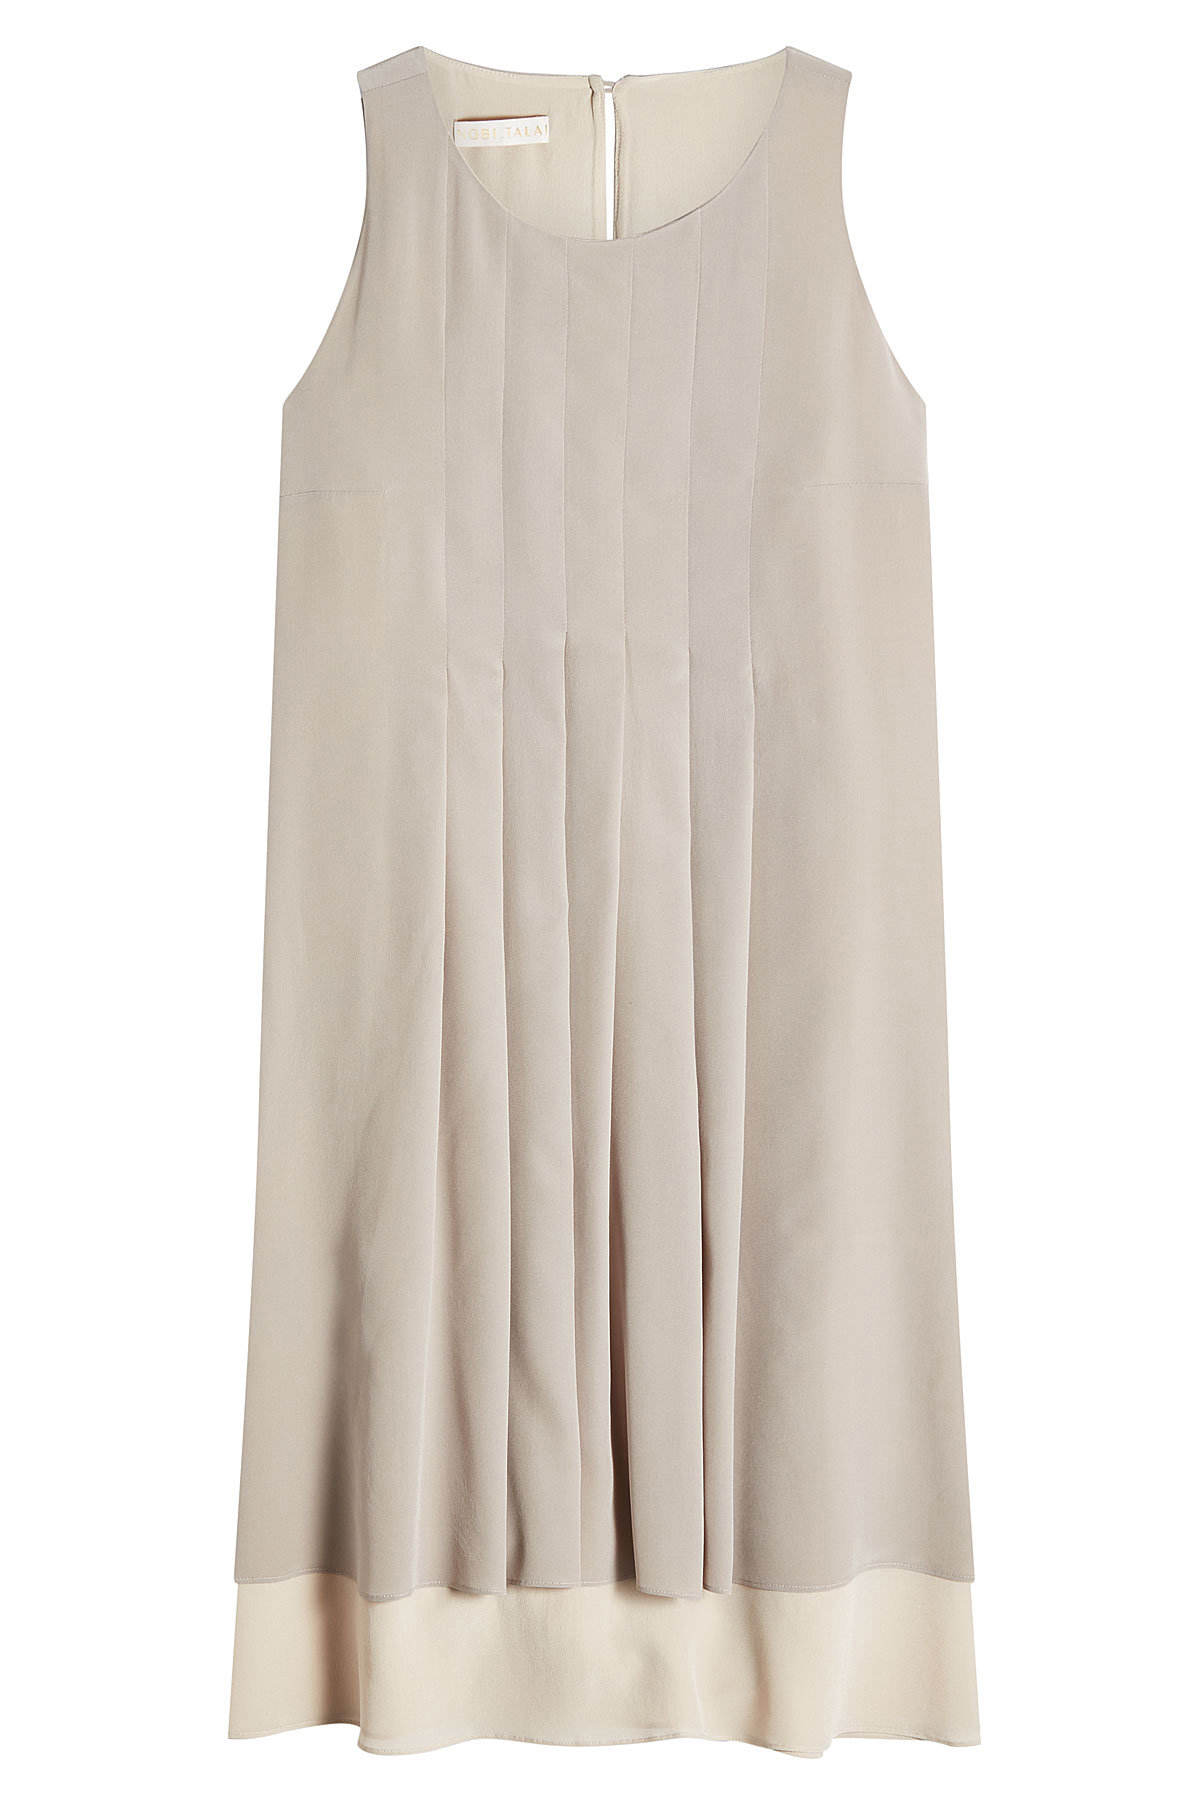 Layered and Pleated Silk Dress by Nobi Talai